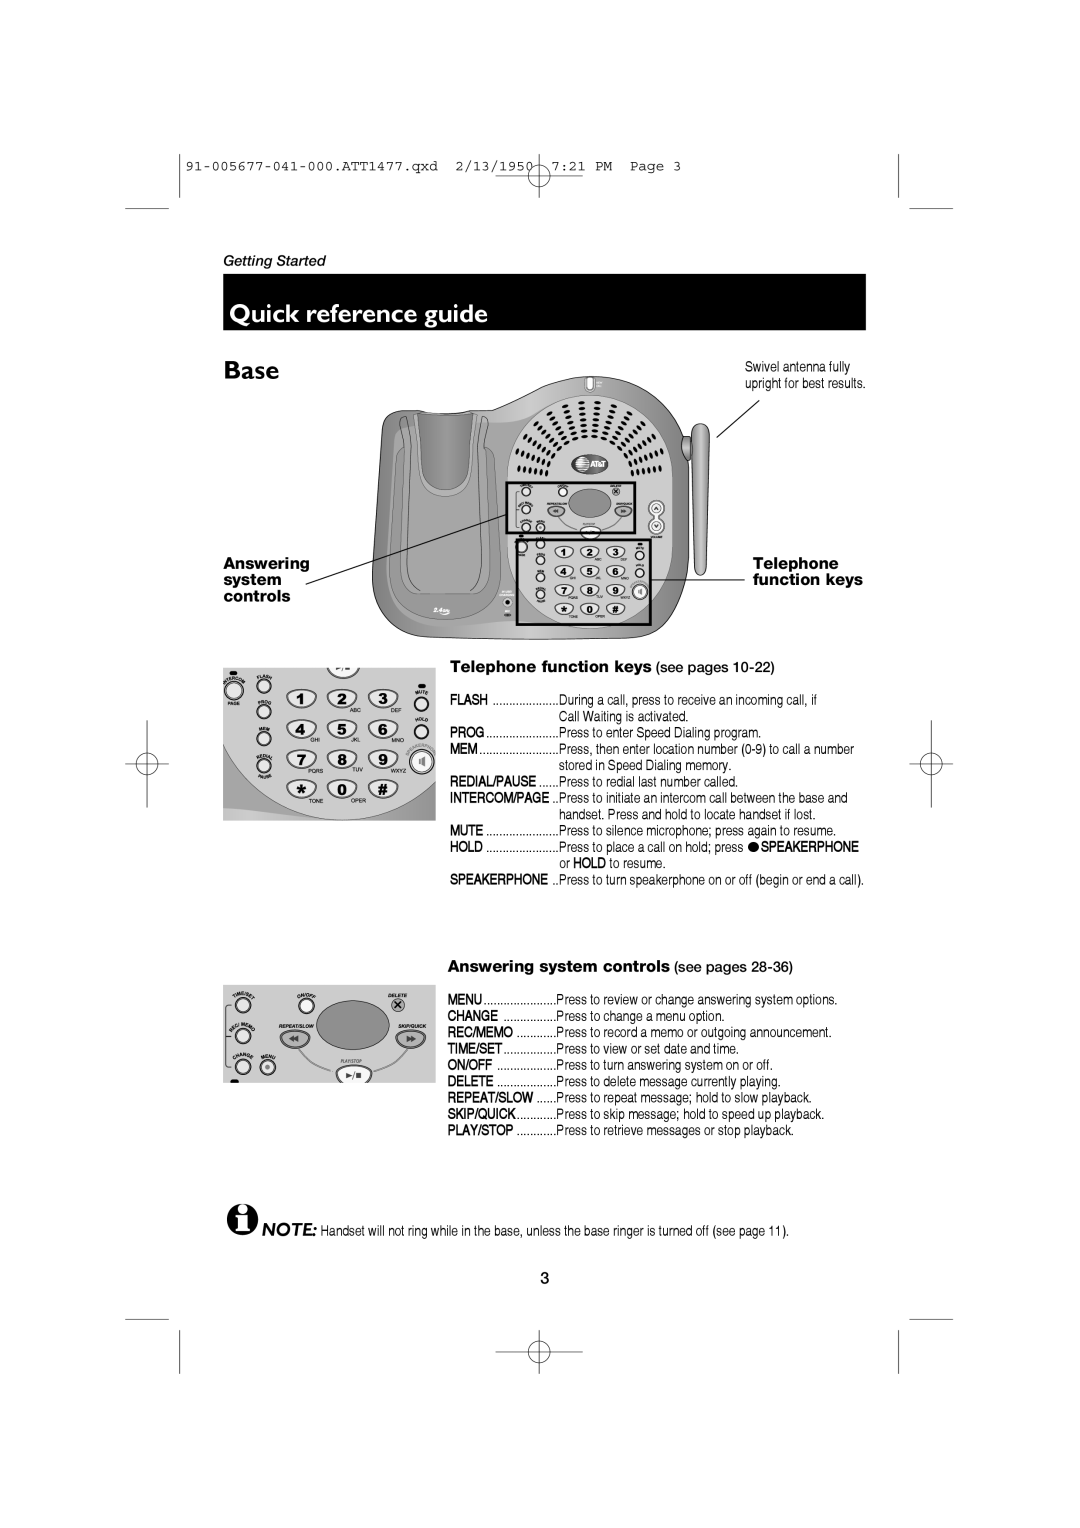 AT&T 1177 Base, Quick reference guide, 91-005677-041-000.ATT1477.qxd 2/13/1950 721 PM Page, Getting Started, Speakerphone 